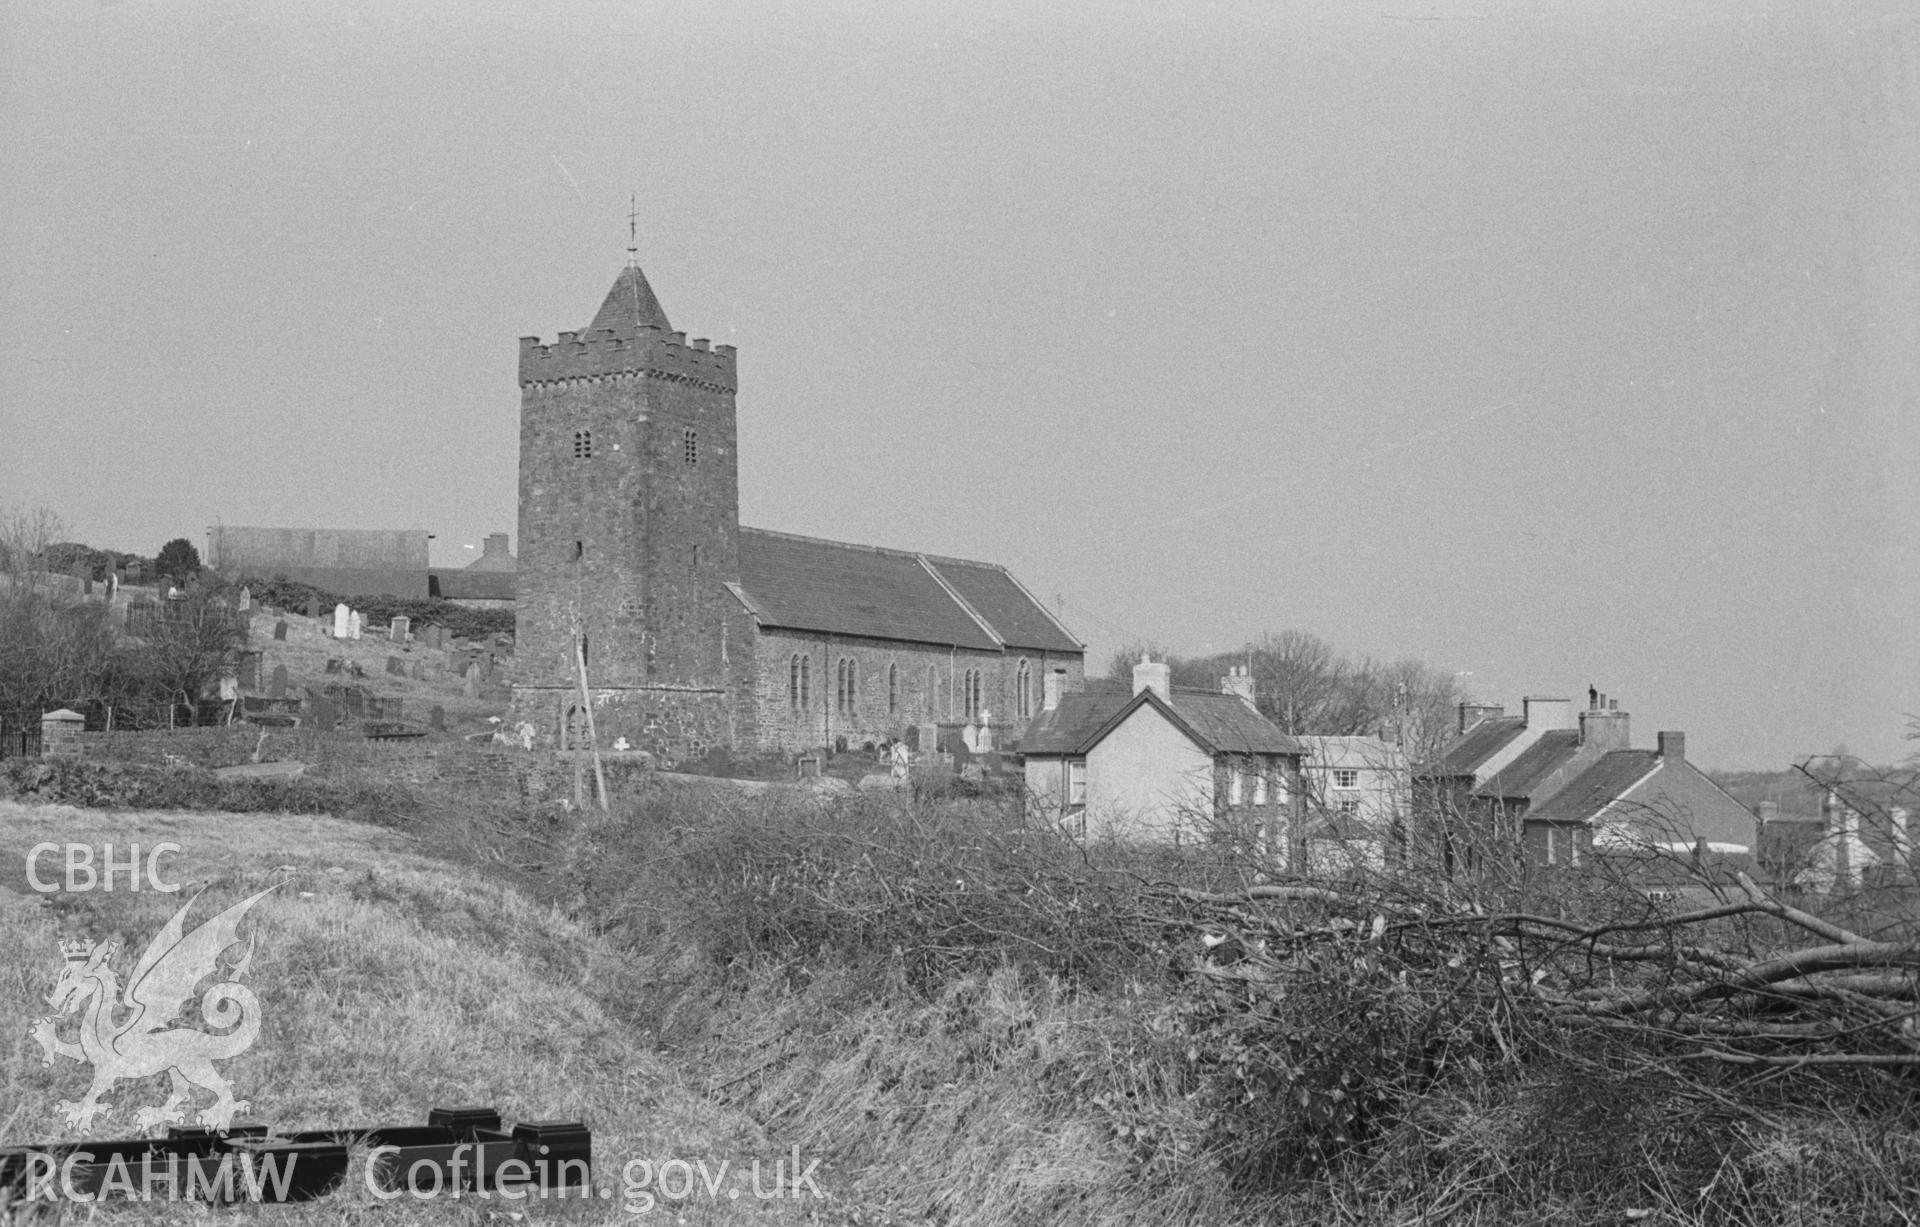 Black and White photograph showing St David's church, Llanarth. Photographed by Arthur Chater in April 1963 from Grid Reference SN 422 577, looking north east.